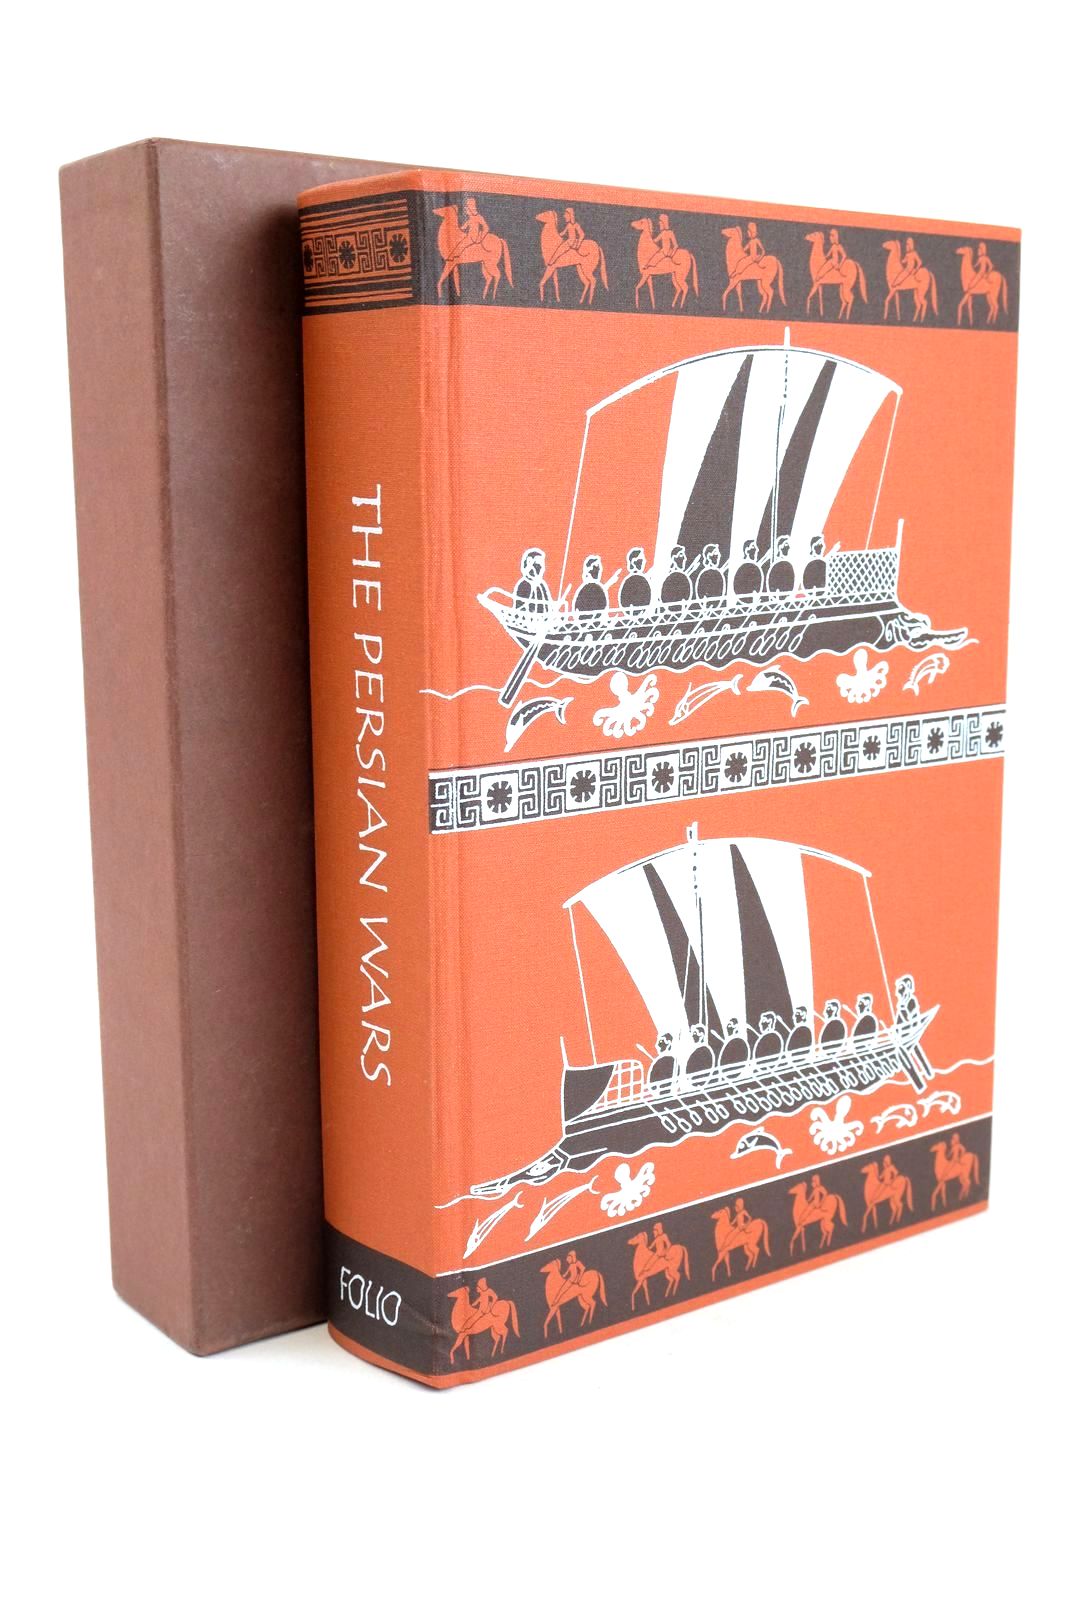 Photo of THE PERSIAN WARS written by Burn, A.R. Hornblower, Simon published by Folio Society (STOCK CODE: 1326008)  for sale by Stella & Rose's Books